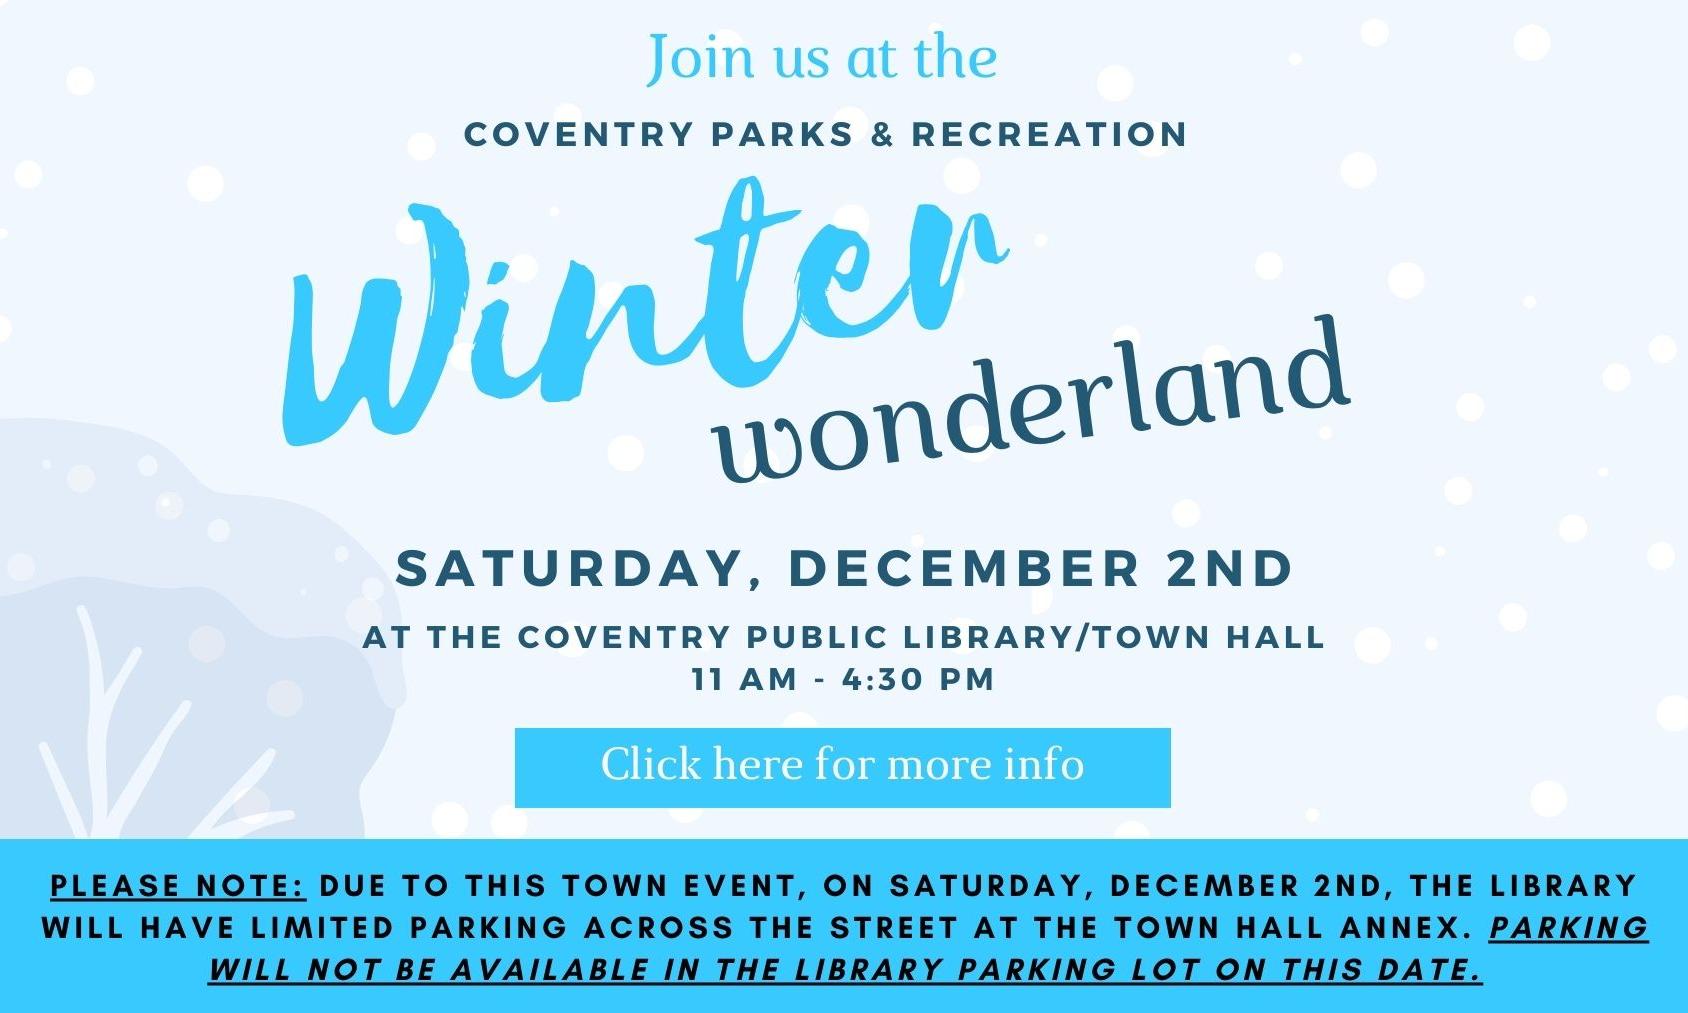 Winter Wonderland - Saturday, Dec. 2nd 11am - 4:30 pm - There will be no parking at the library on 12/2.